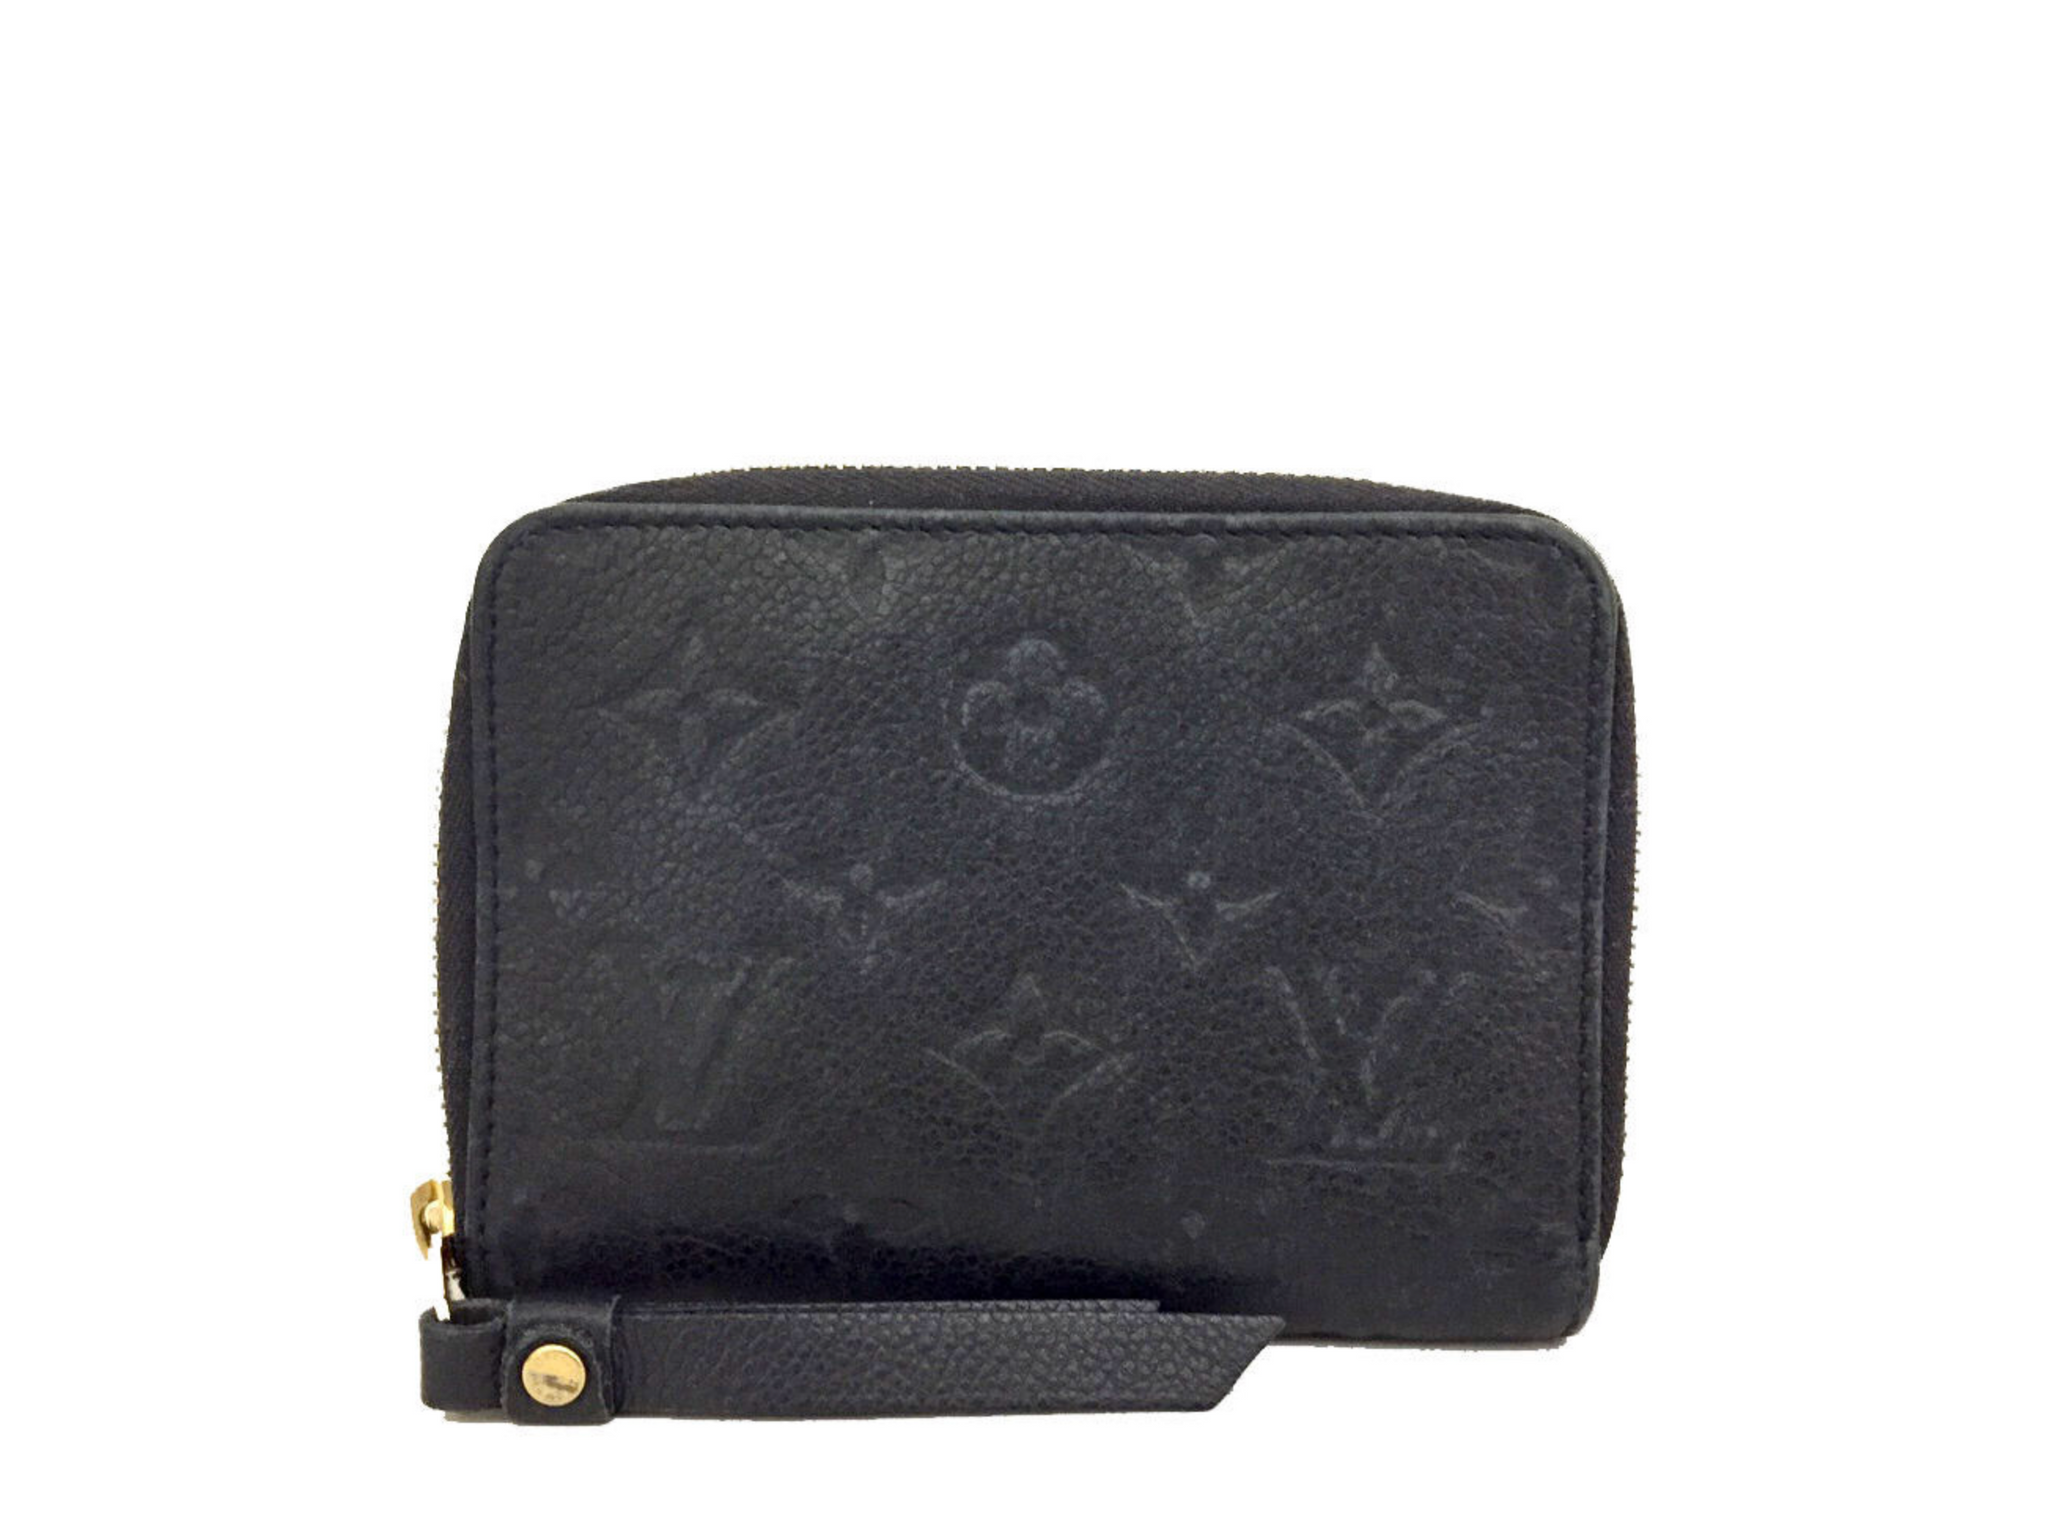 ✨Gently used AS IS monogram wallet. AS IS - small marks and minor